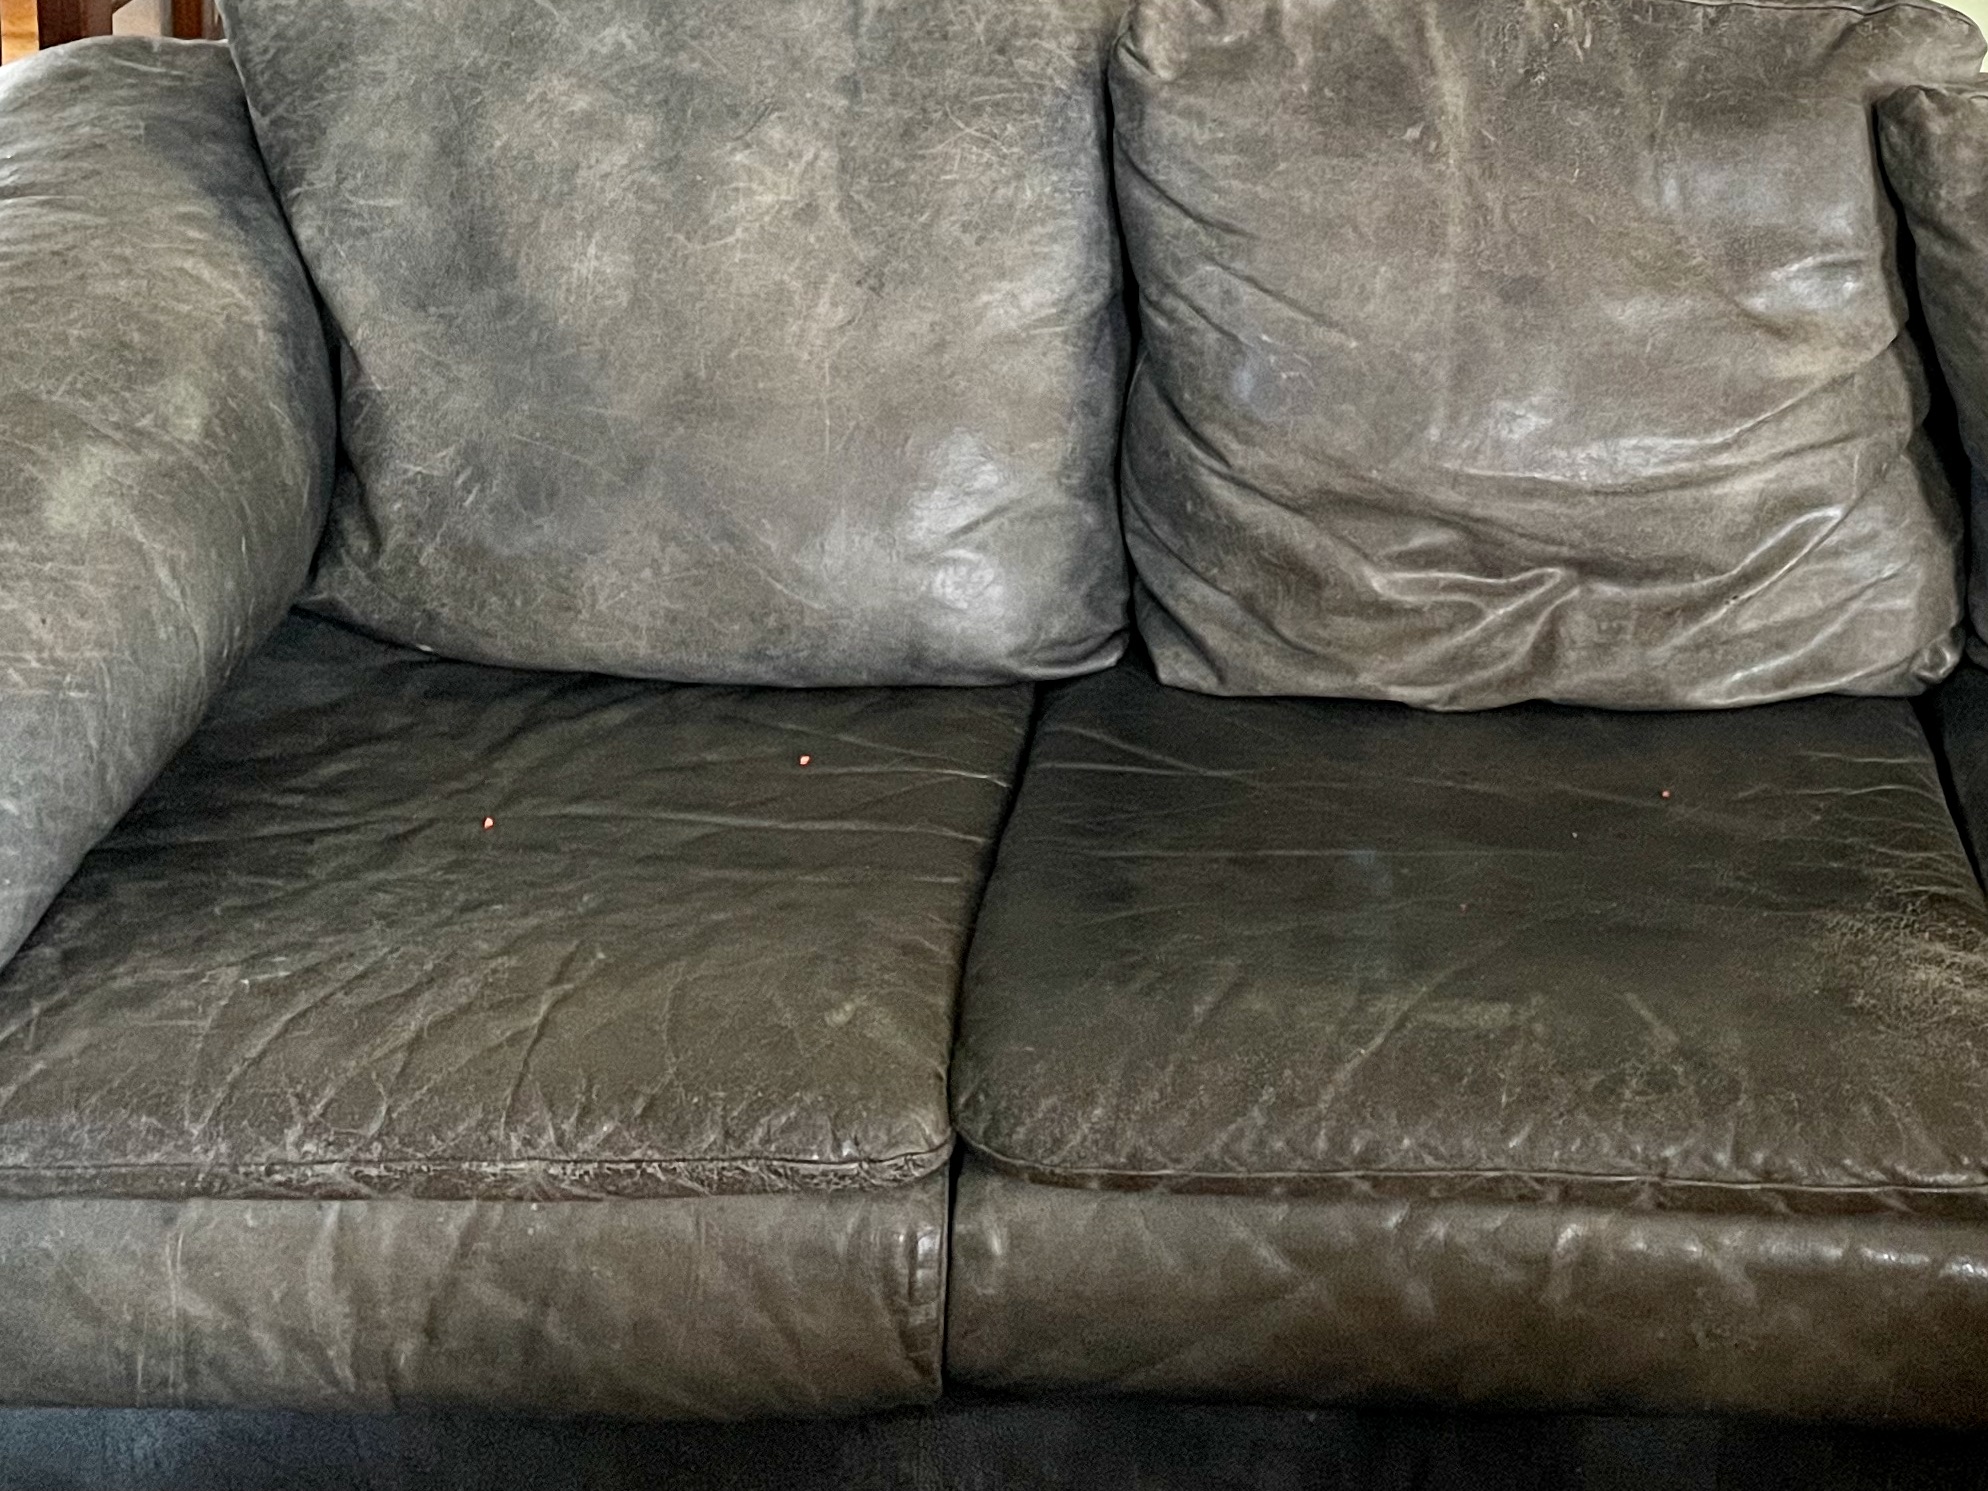 How to Clean a Leather Couch